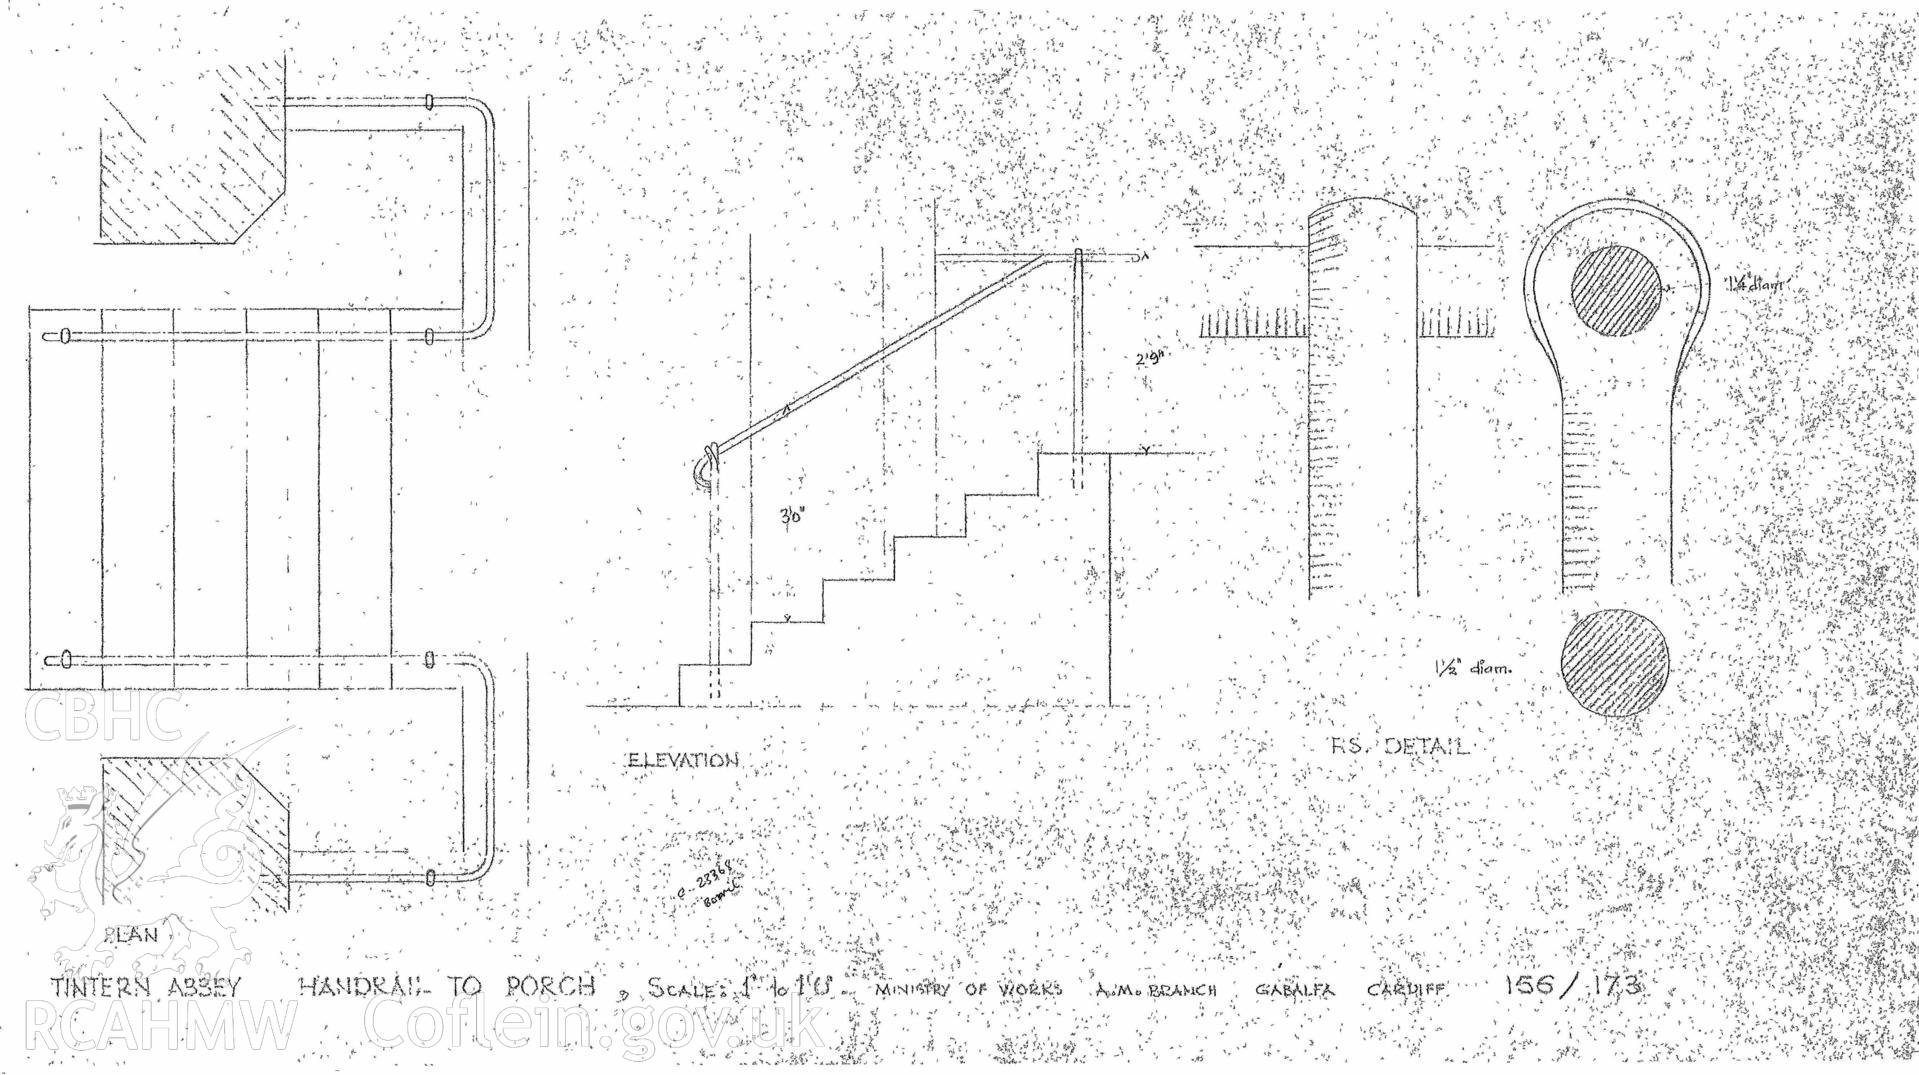 Cadw guardianship monument drawing of Tintern Abbey. Handrail to porch. Cadw ref. No. 156/173. Scale 1:12.